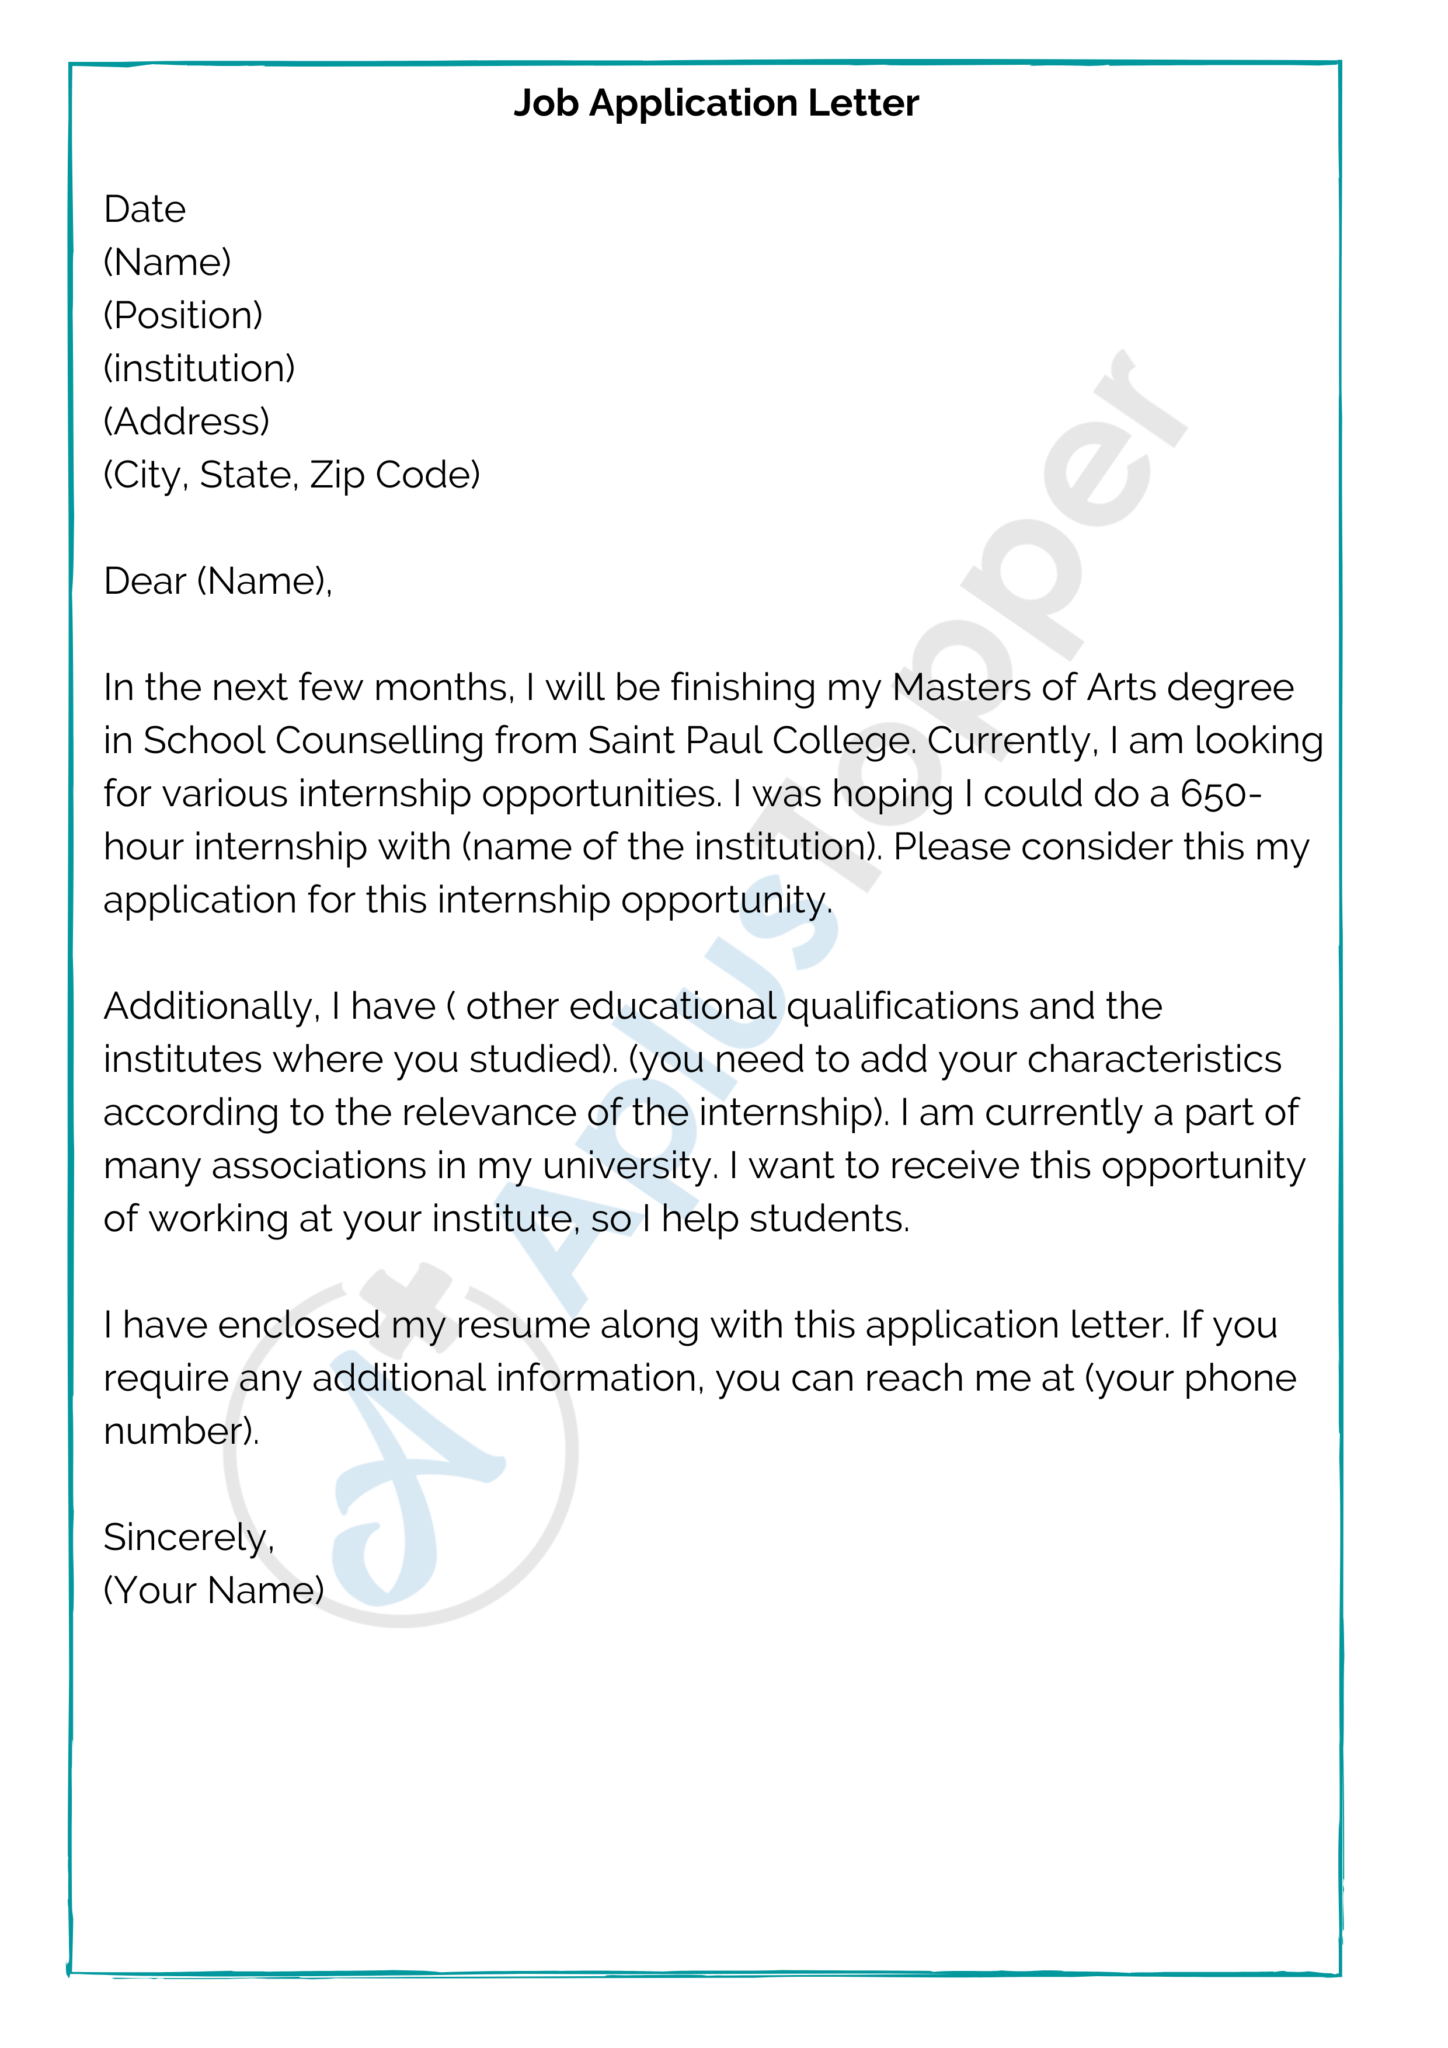 an application letter is used to